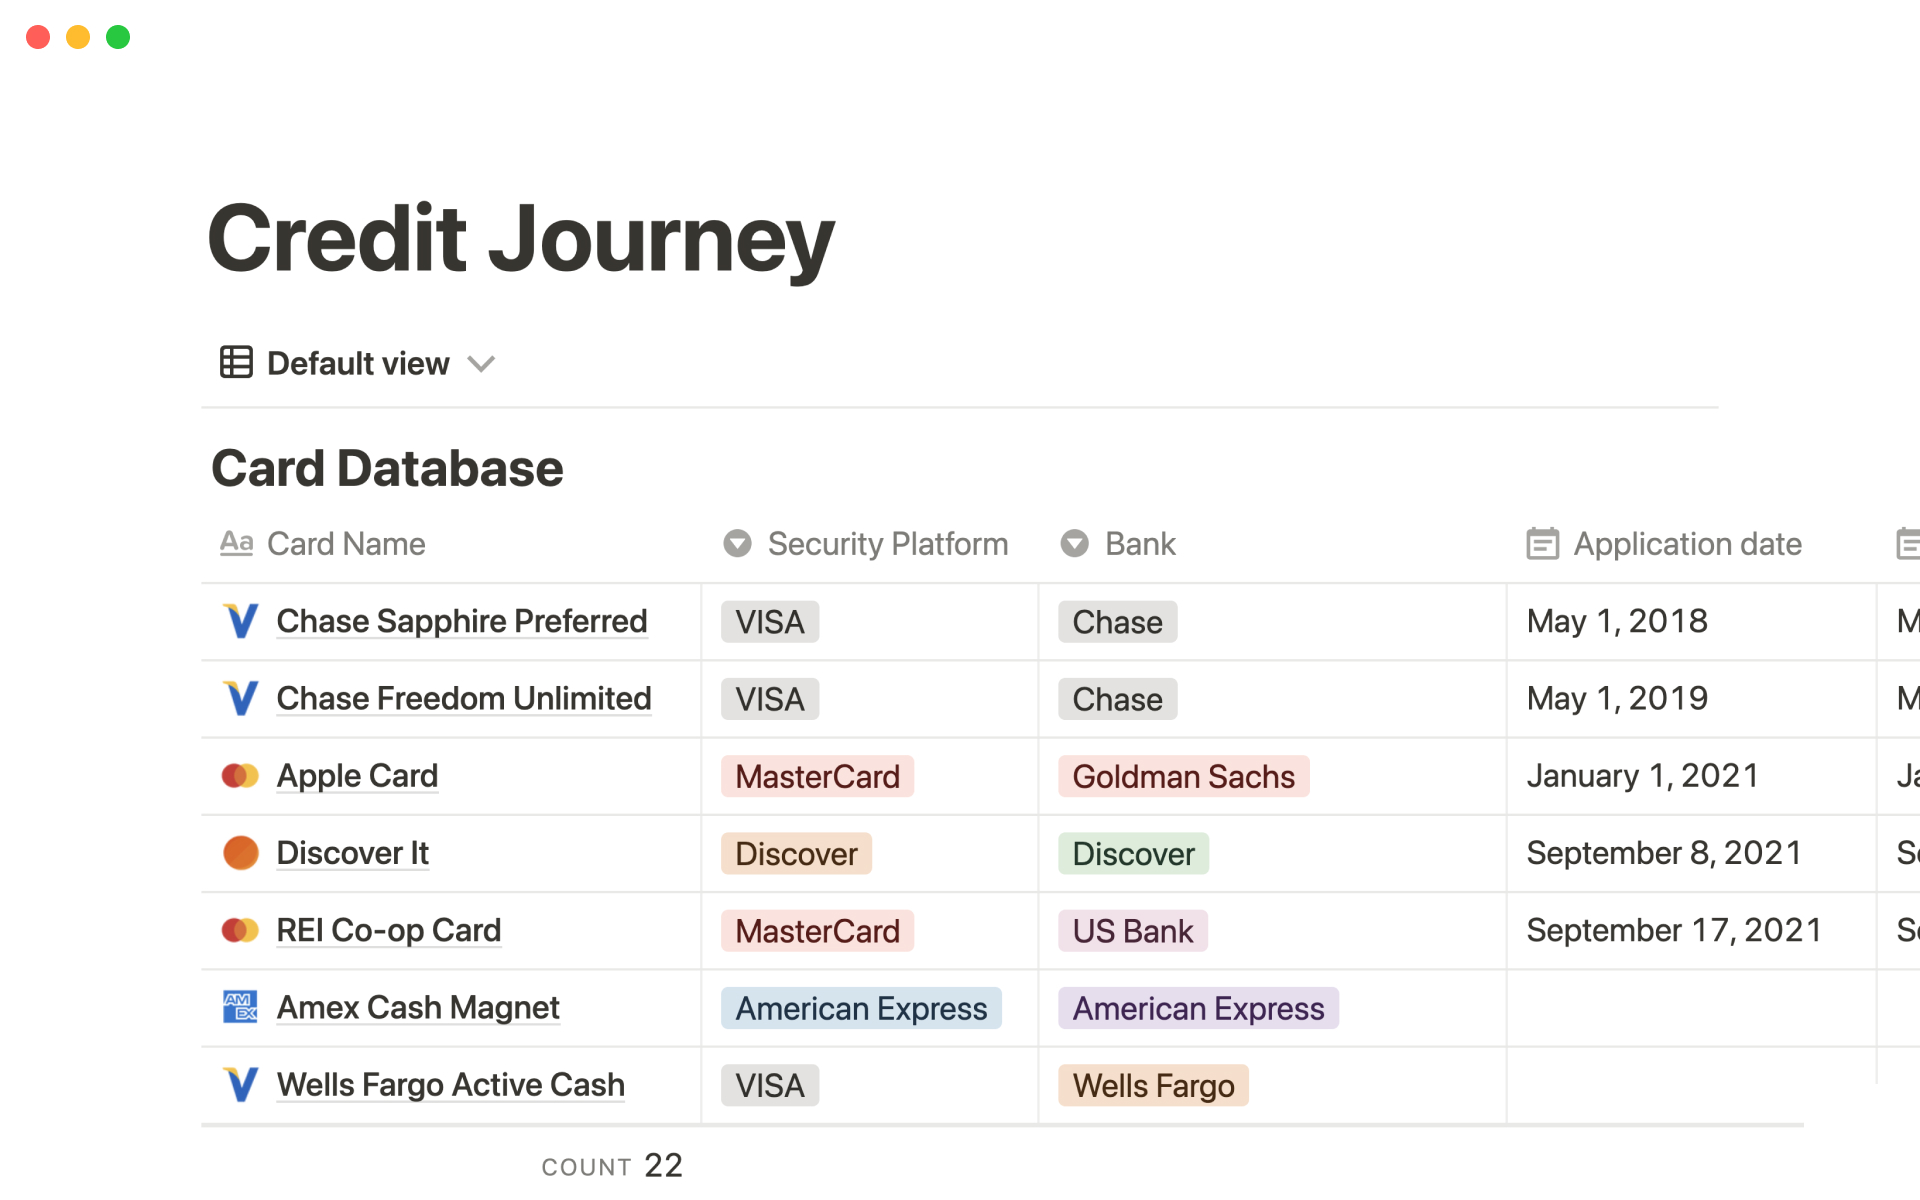 Helps you track your credit cards, enquiries, and credit scores.